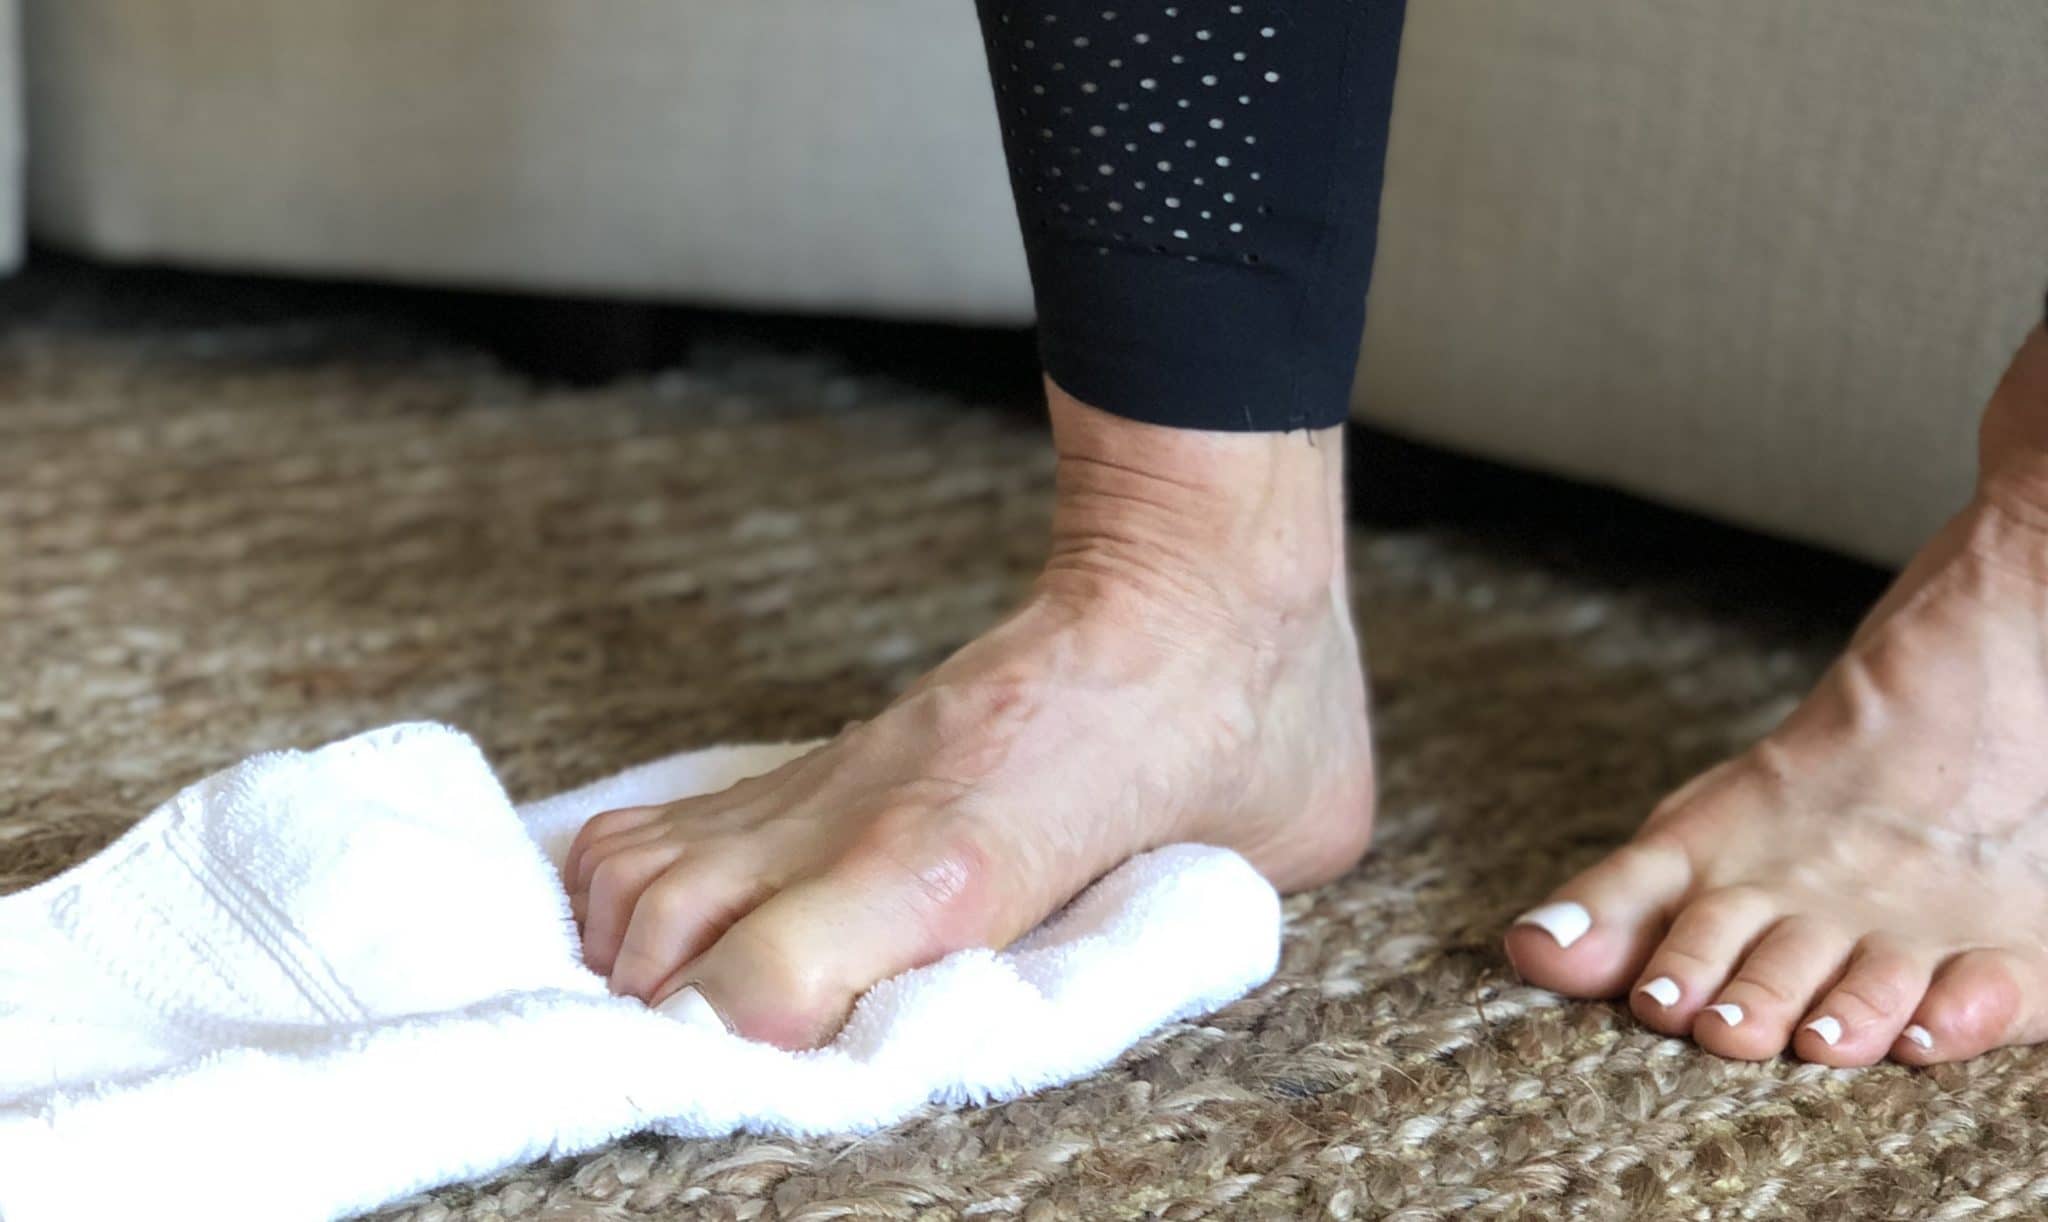 Close-up of foot squeezing washcloth on the floor